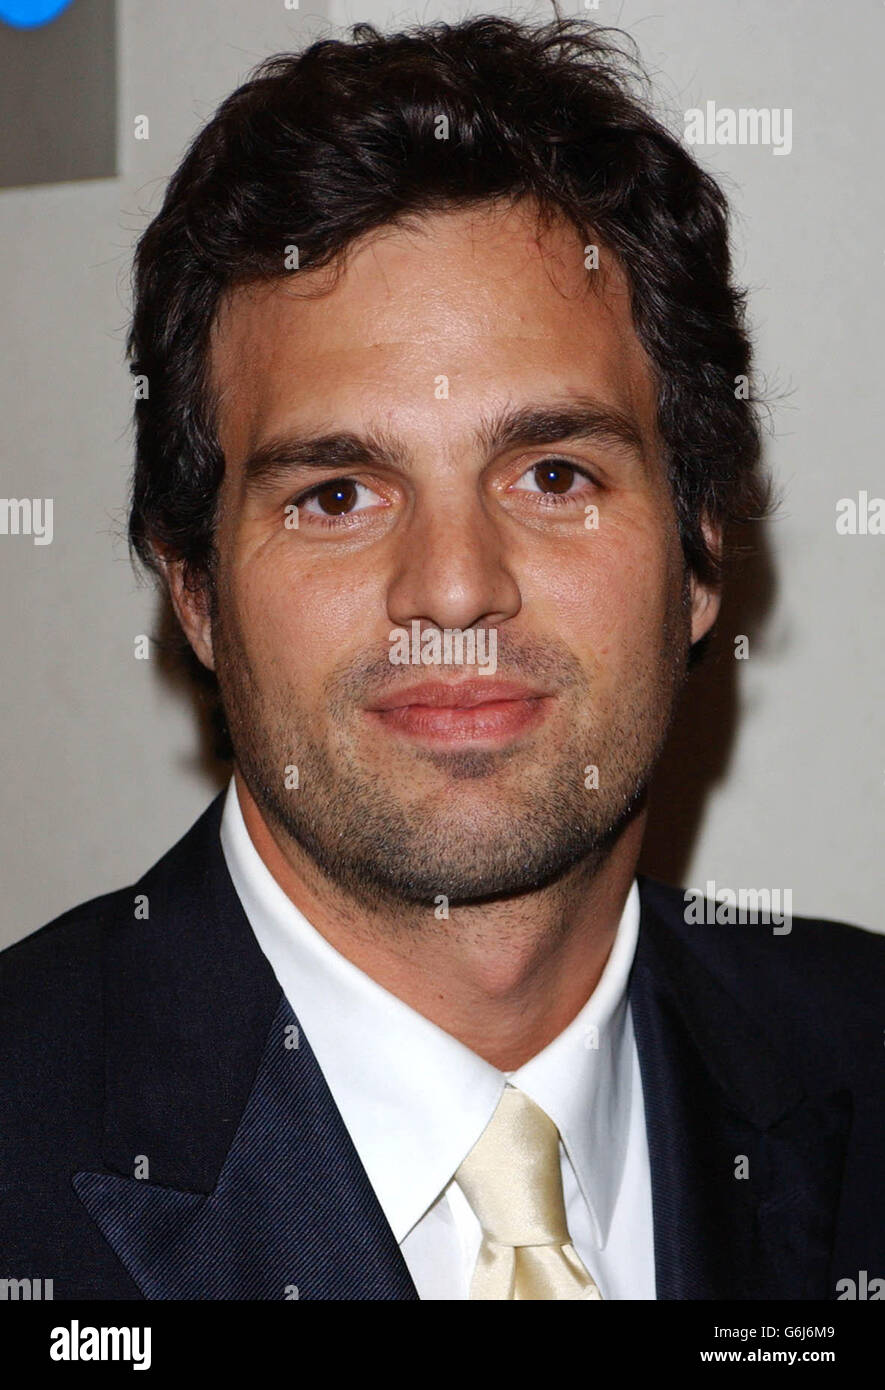 Star of the film Mark Ruffalo arrives for the UK premiere of 'In The Cut' at Odeon Leicester Square in central London. The premiere marks the opening of The Times BFI 47th Annual London Film Festival. Stock Photo